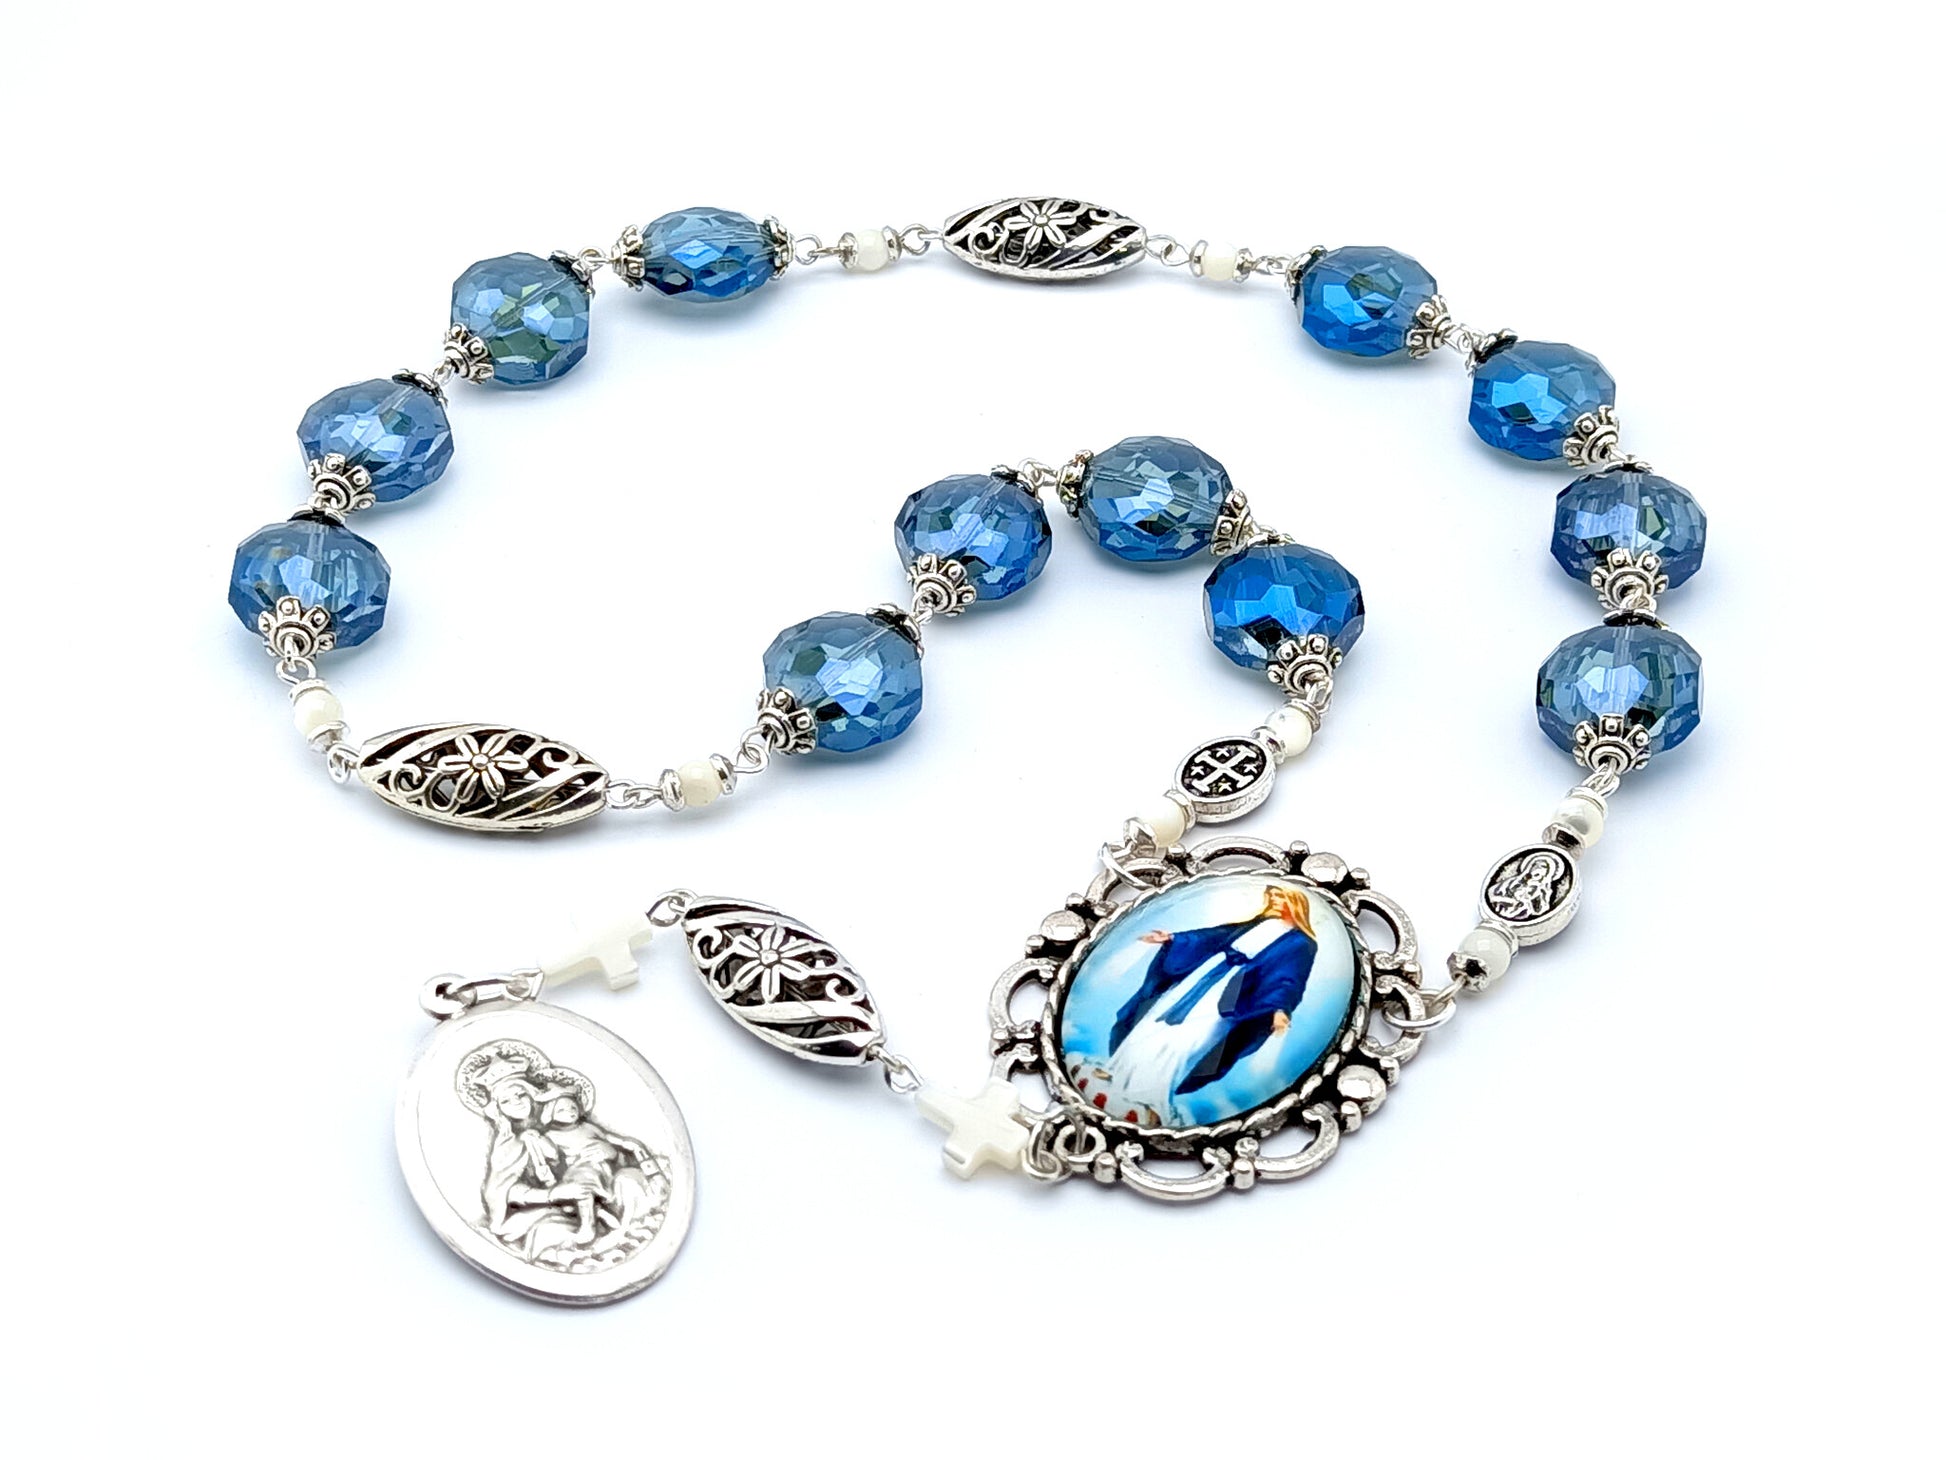 The Immaculate Conception unique rosary beads prayer chaplet with blue faceted and silver beads, picture centre medal and brown scapular end medal.